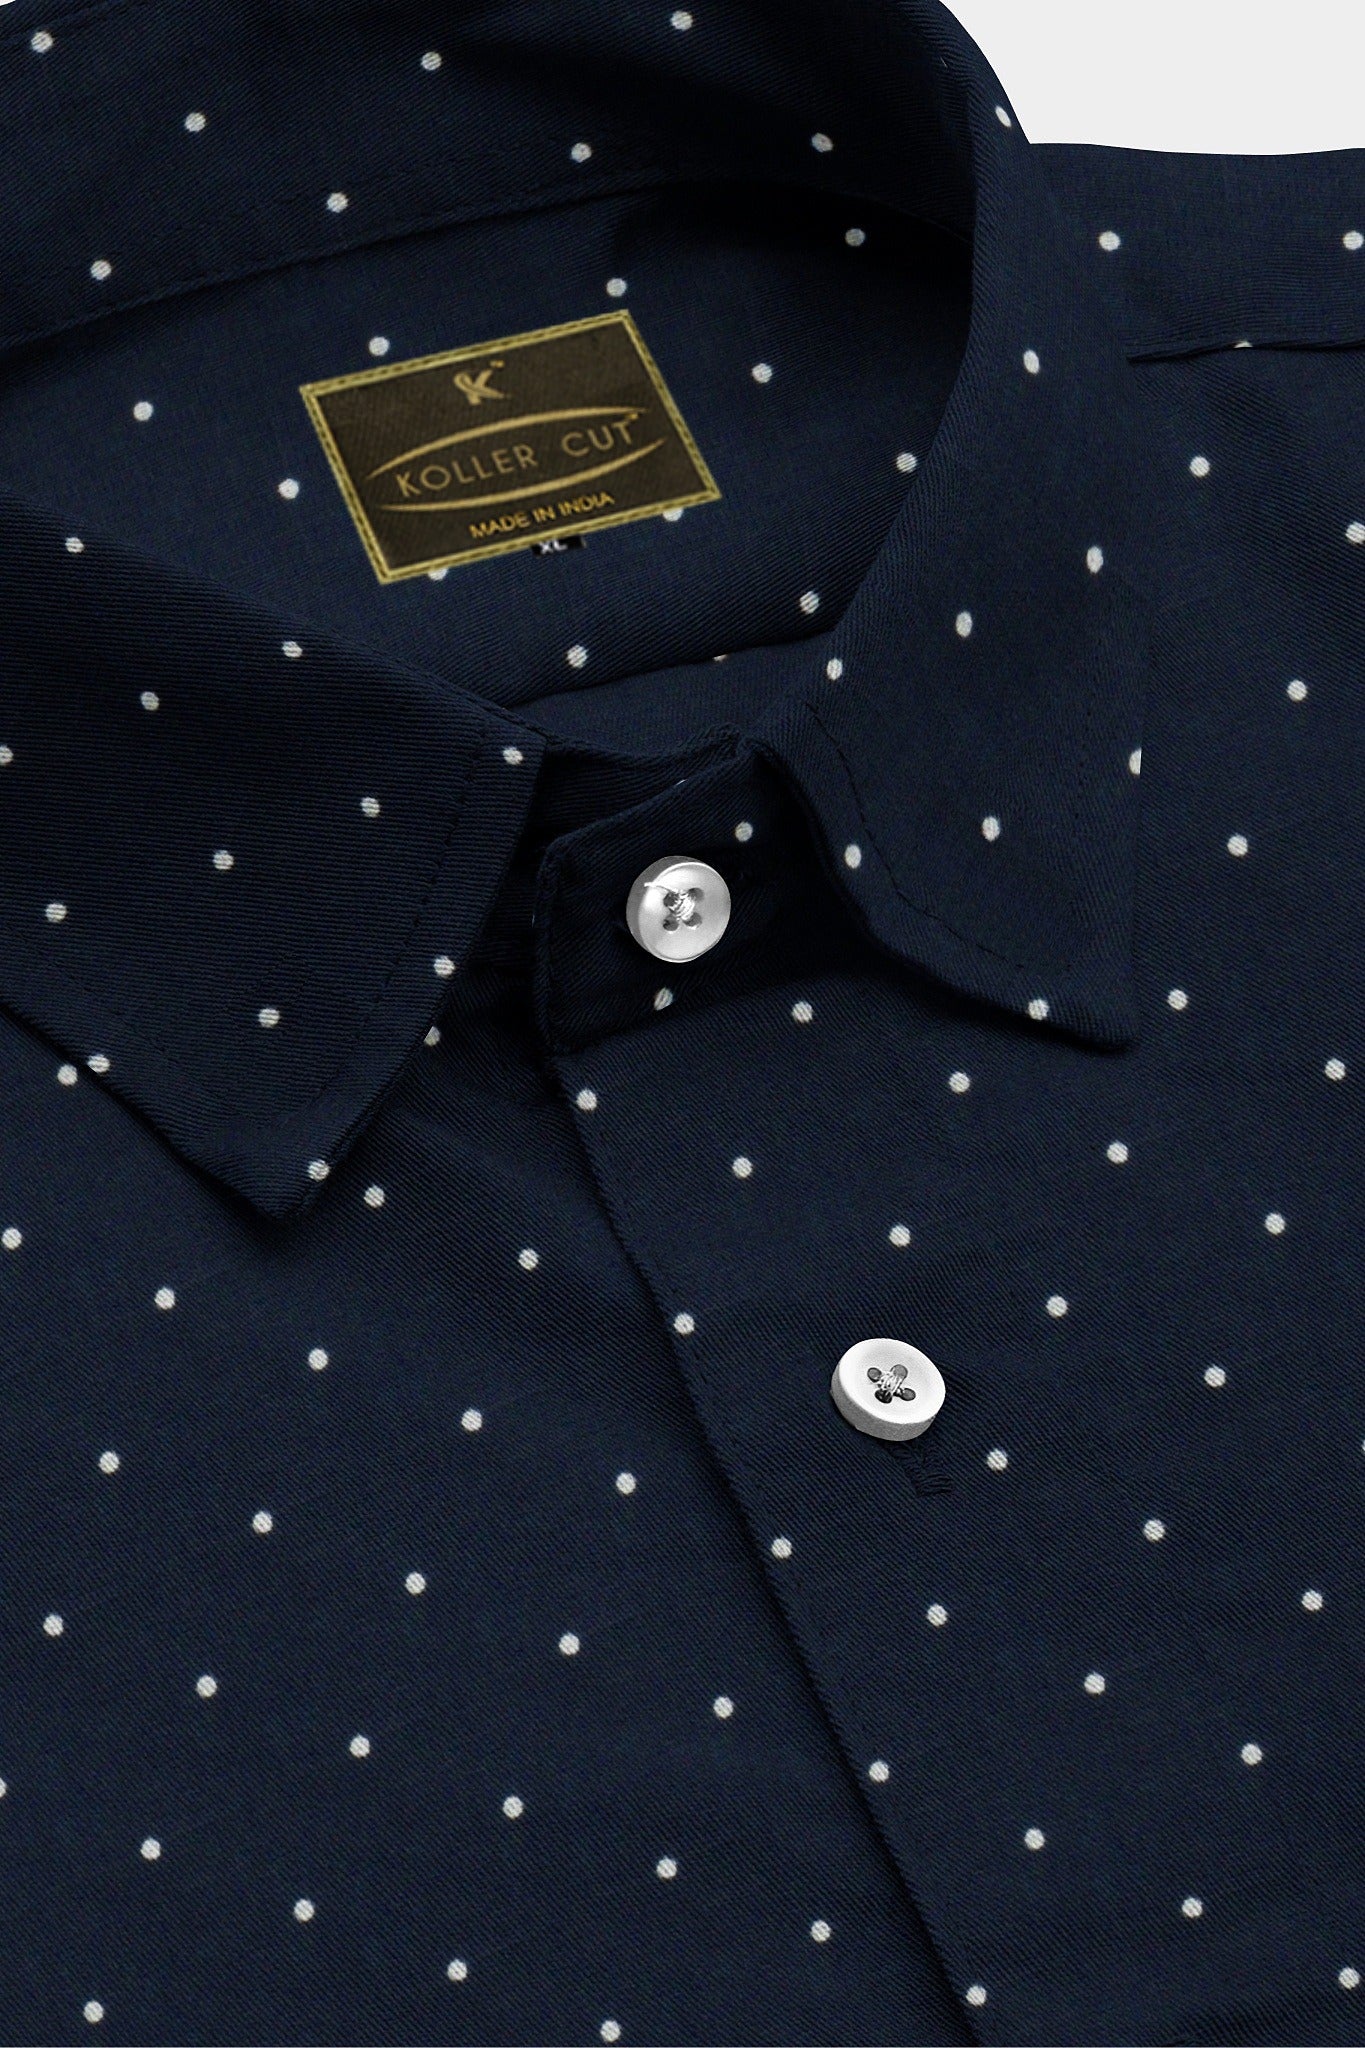 Midnight Blue with White Dotted Men's Cotton Shirt